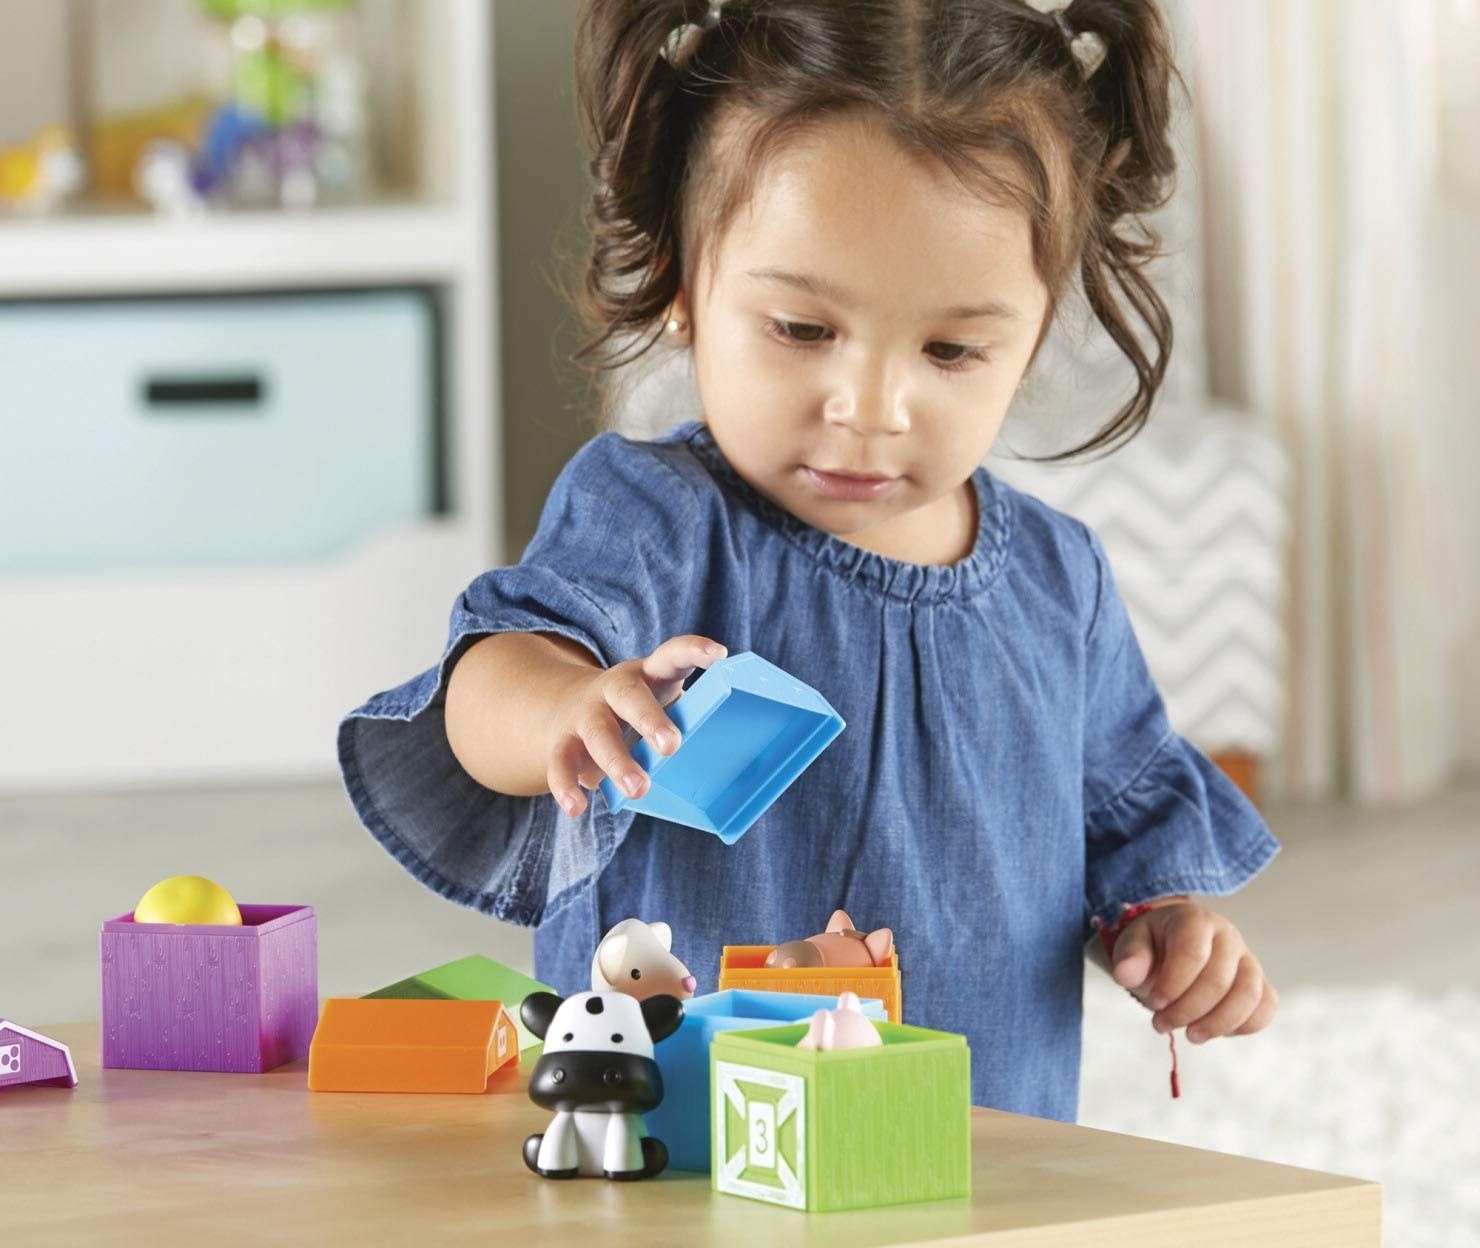 A child model playing with learning farm toys